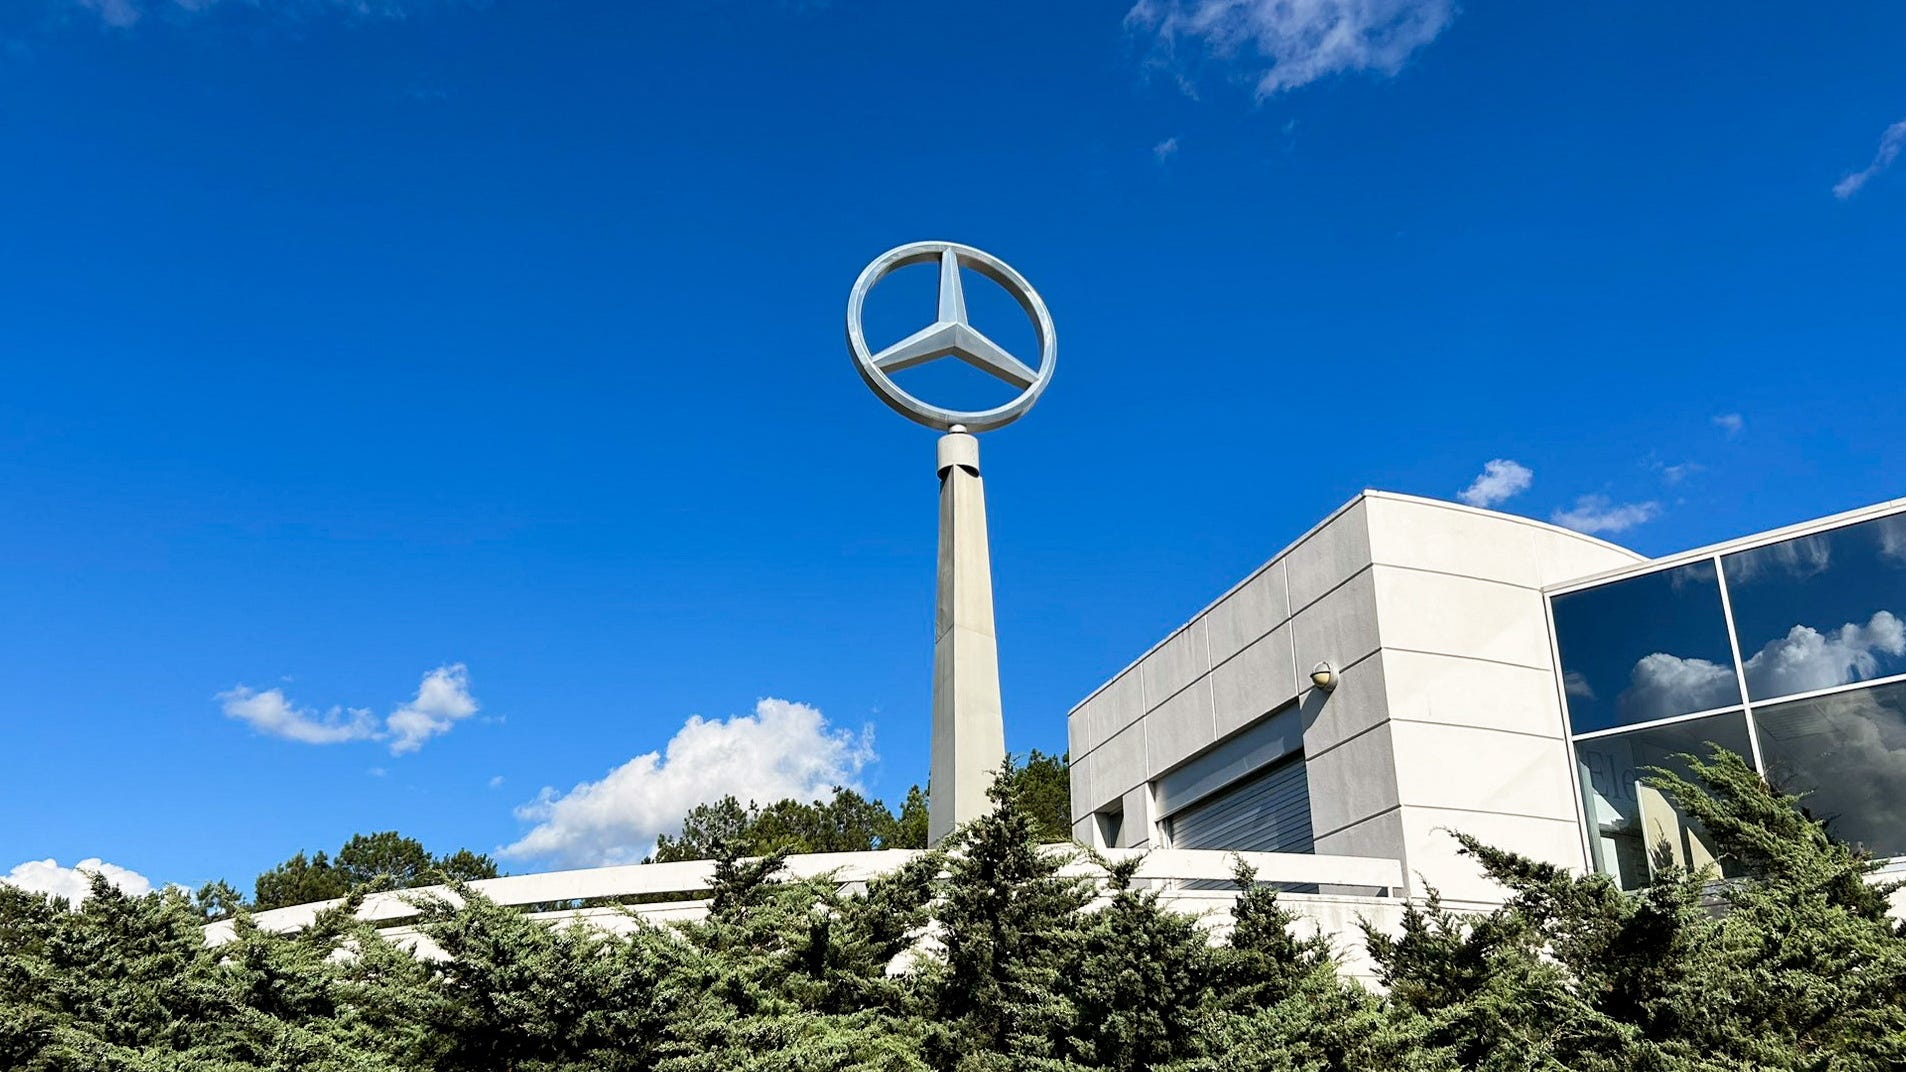 Tuscaloosa Mercedes-Benz workers reject bid to join UAW union